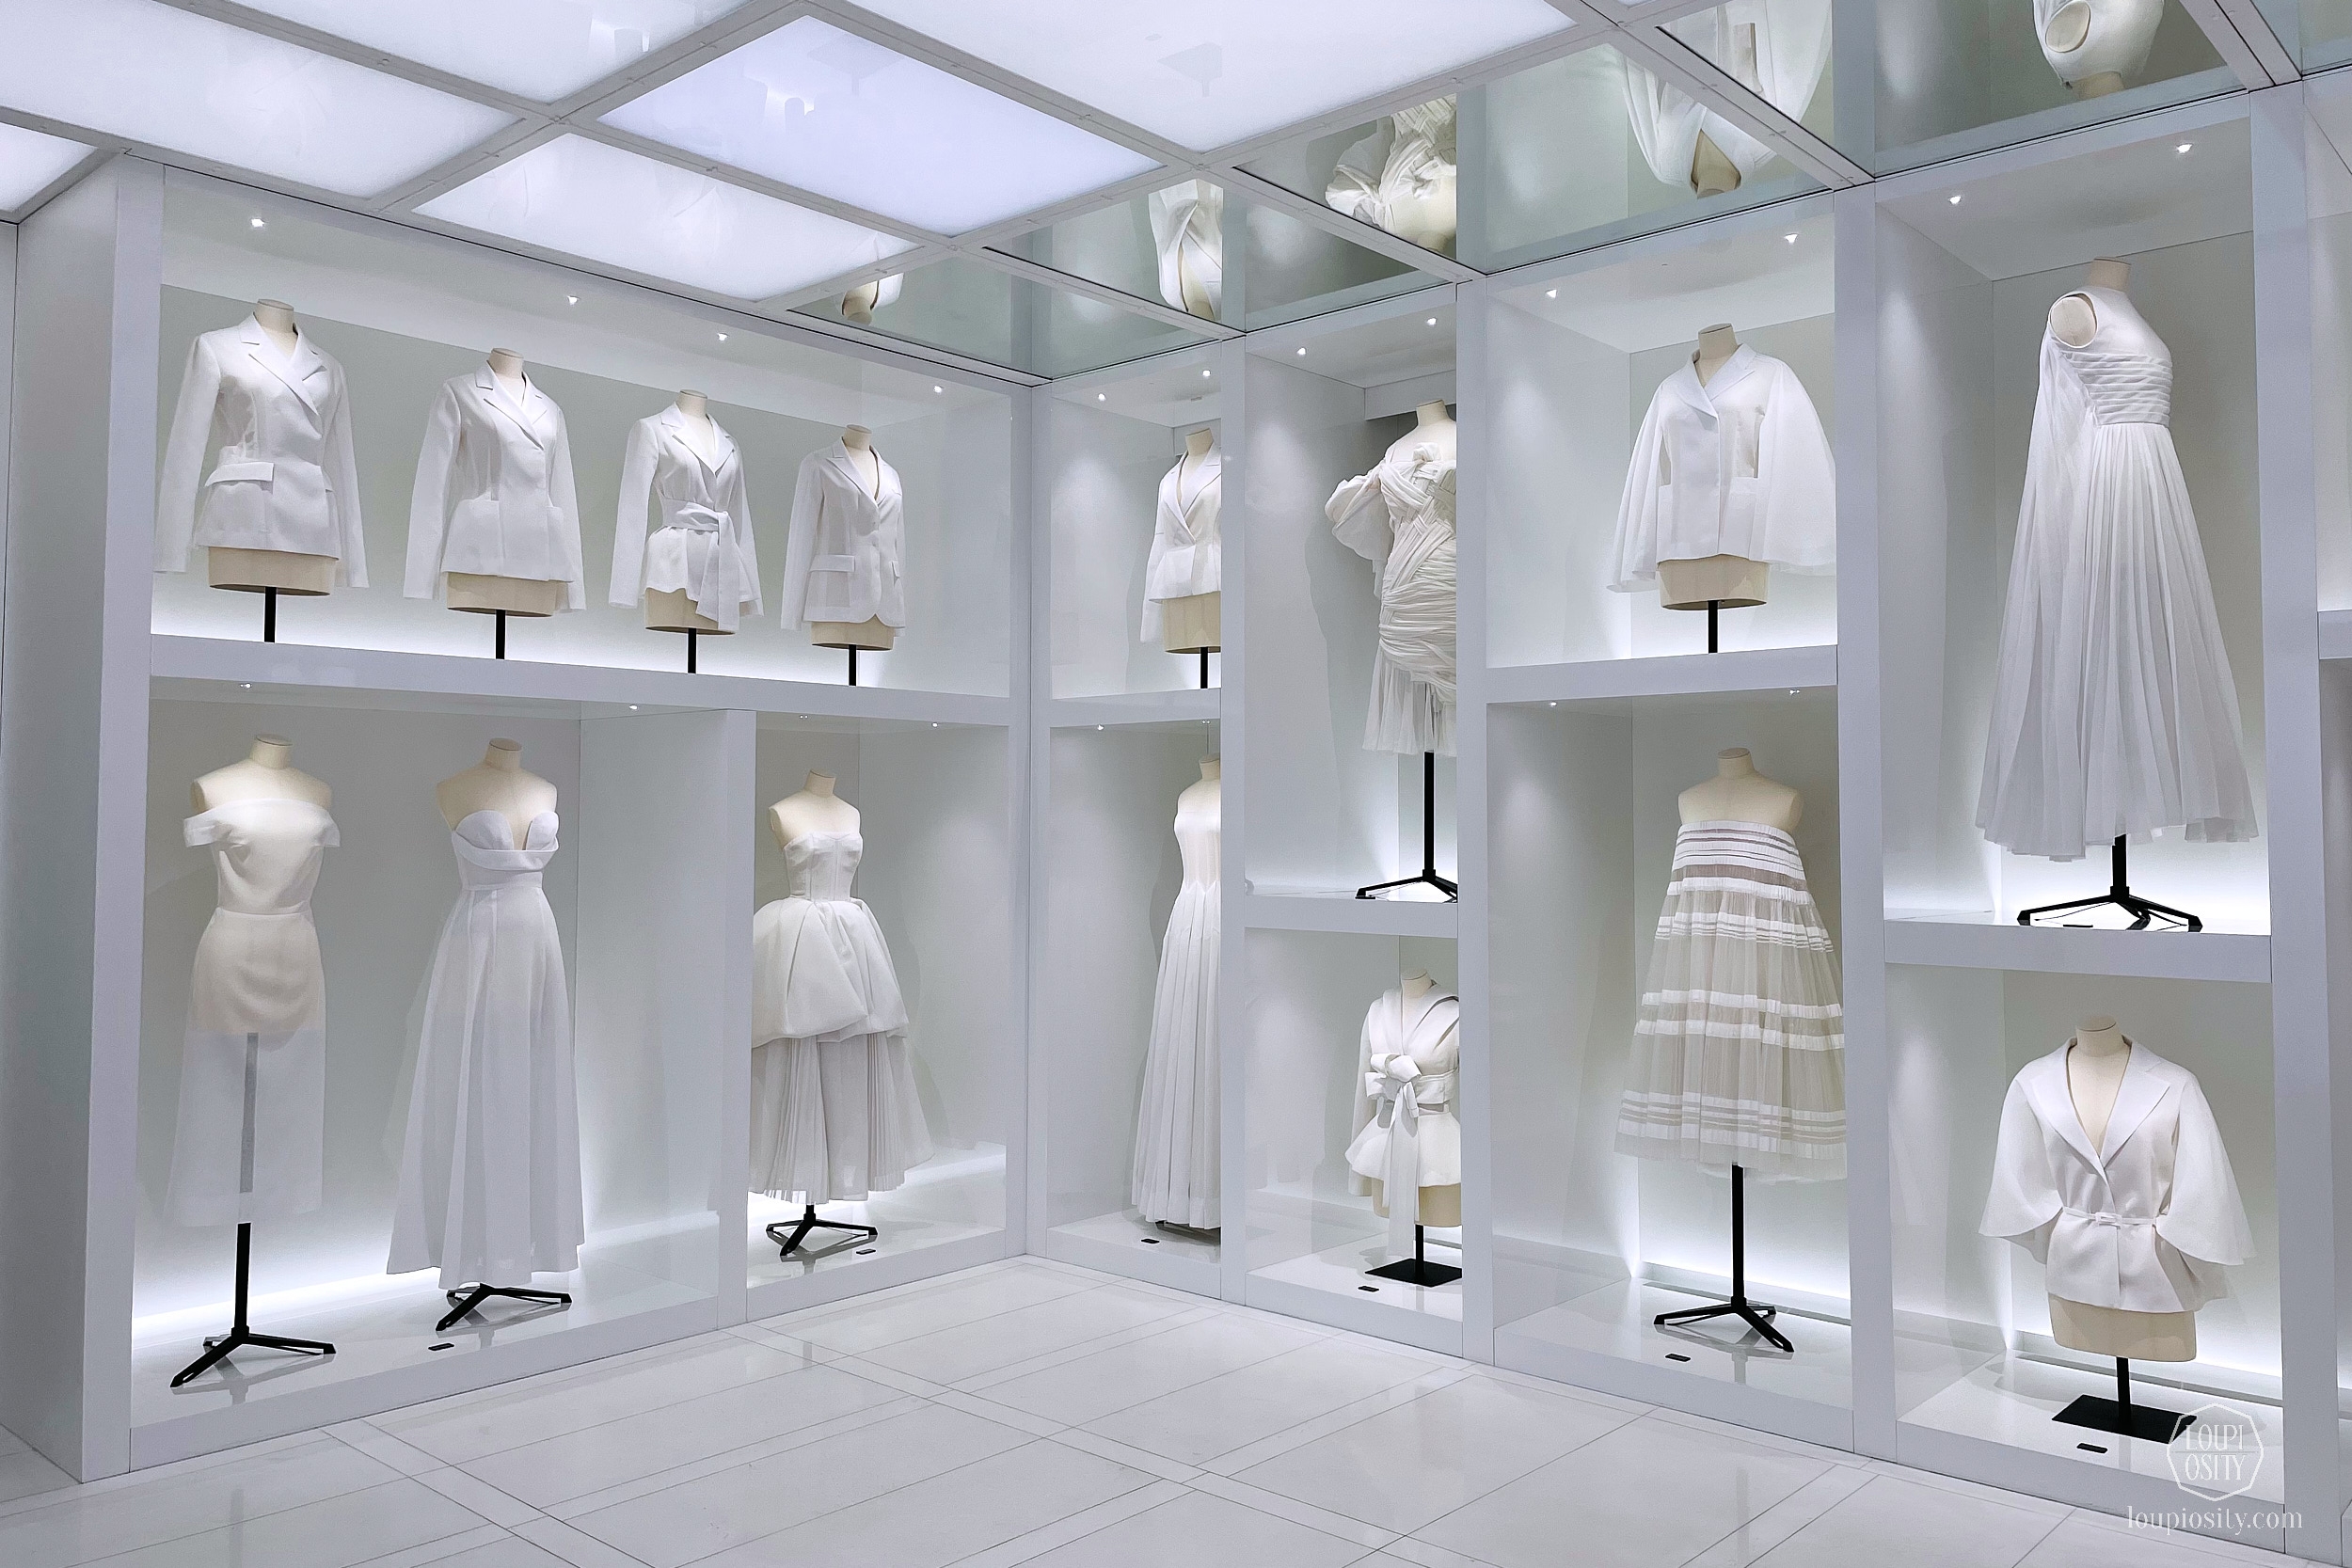 Dior opens La Galerie, a living museum of the brand